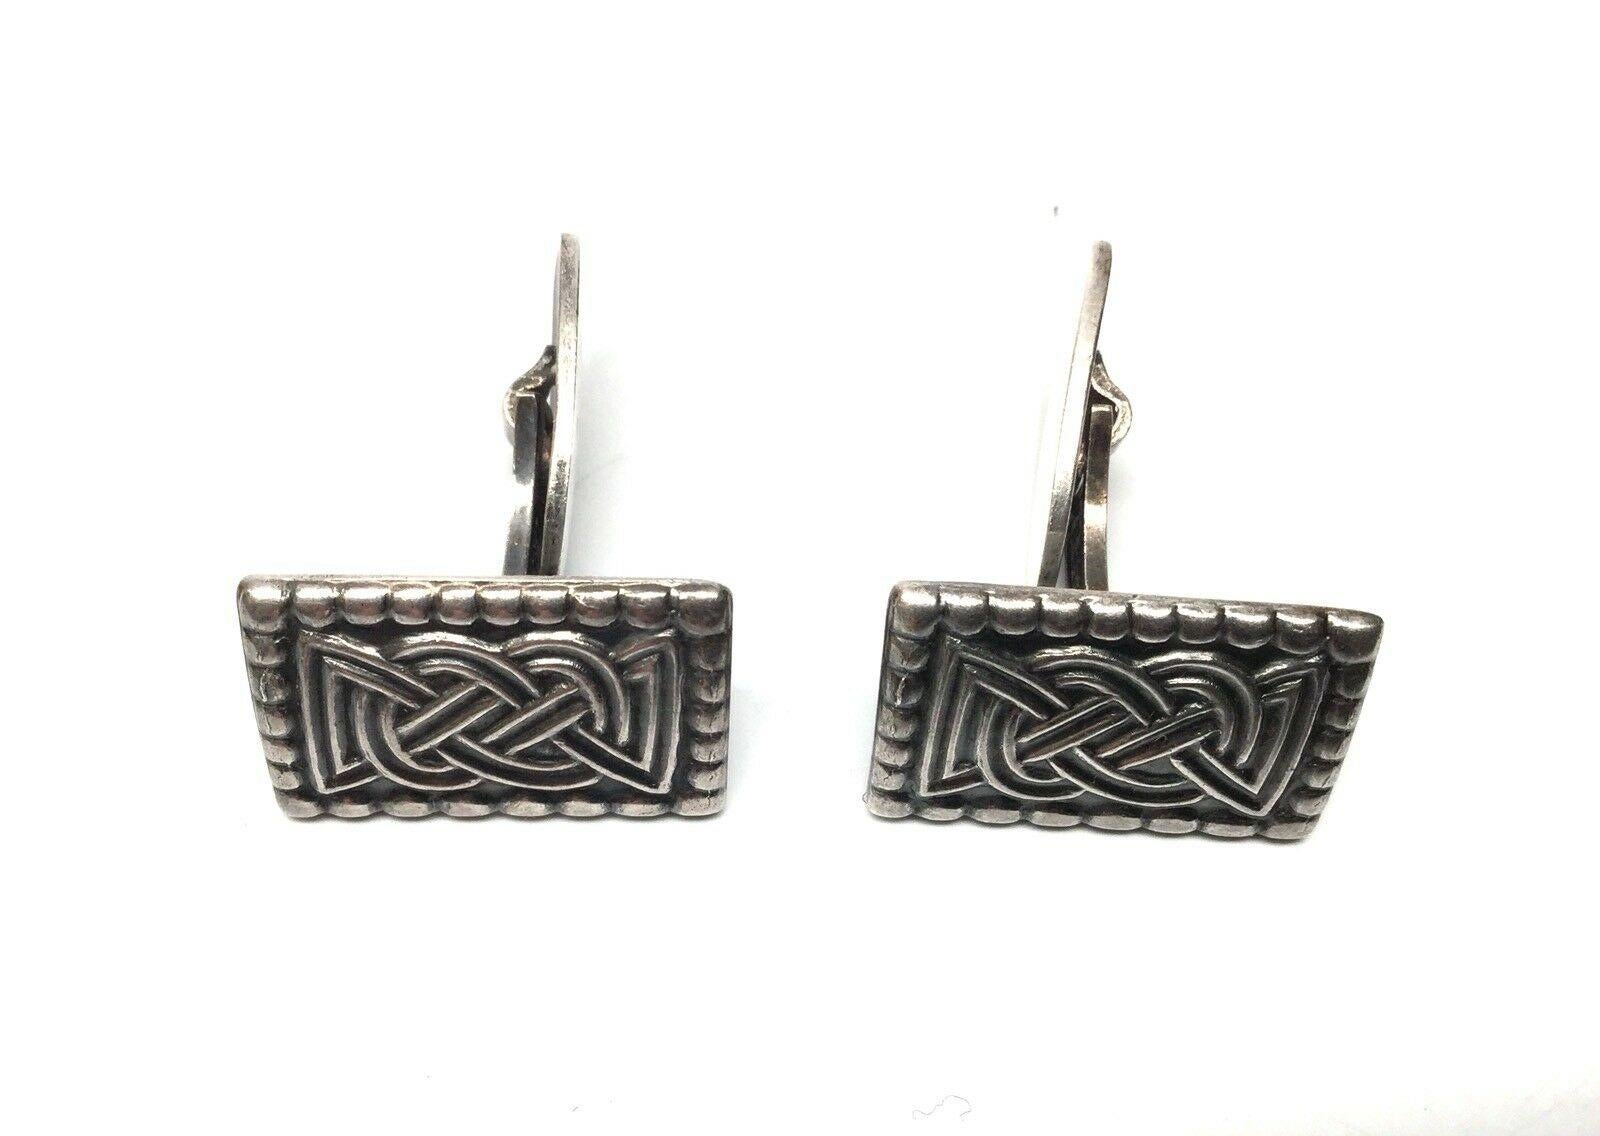 Vintage David Andersen Norway Sterling Silver SAGA Celtic Cufflinks

This is a superb vintage sterling silver pair of cufflinks from David Andersen from Norway from the Saga Celtic series.

Measurements:  Front of cufflinks measure approx:  13 mm L